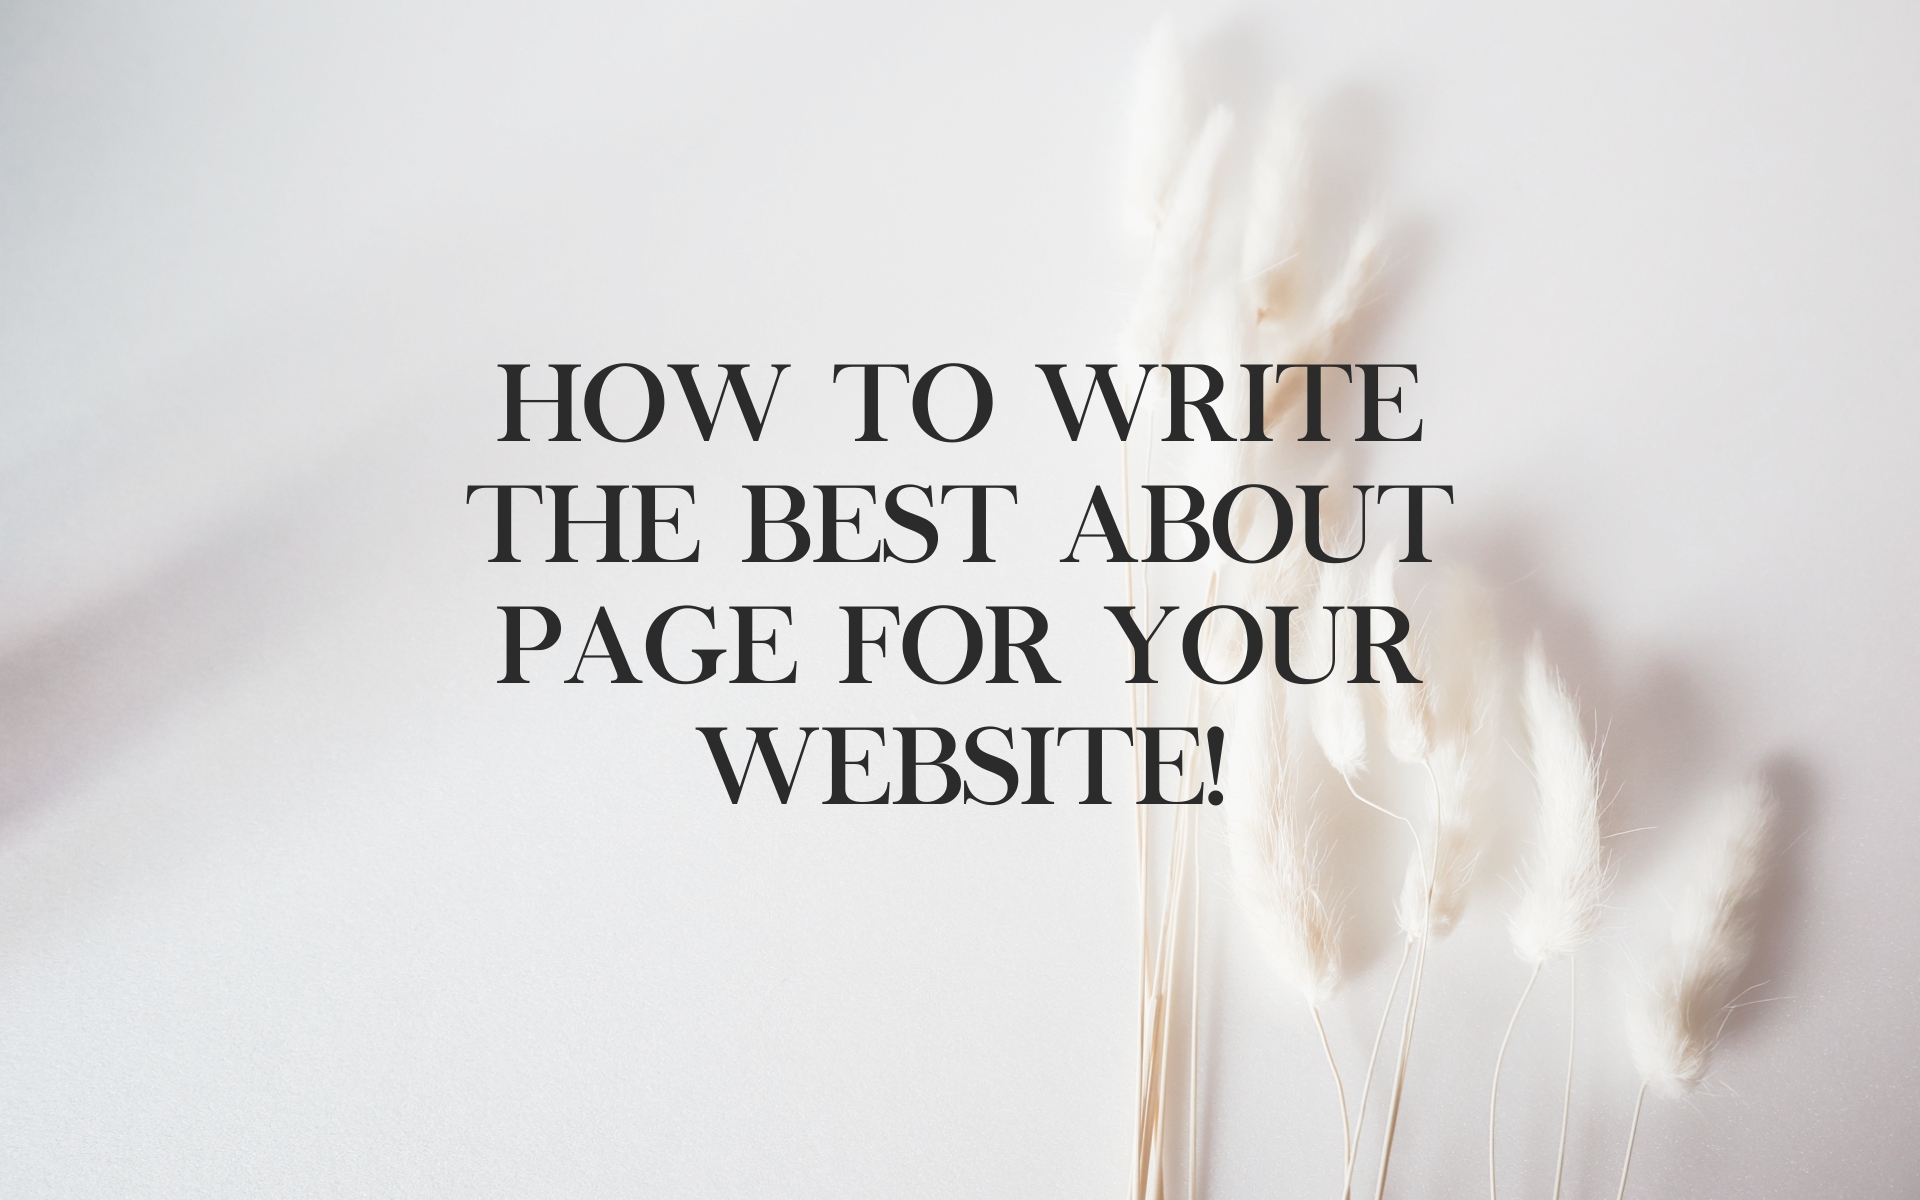 How to write the best about page for your website